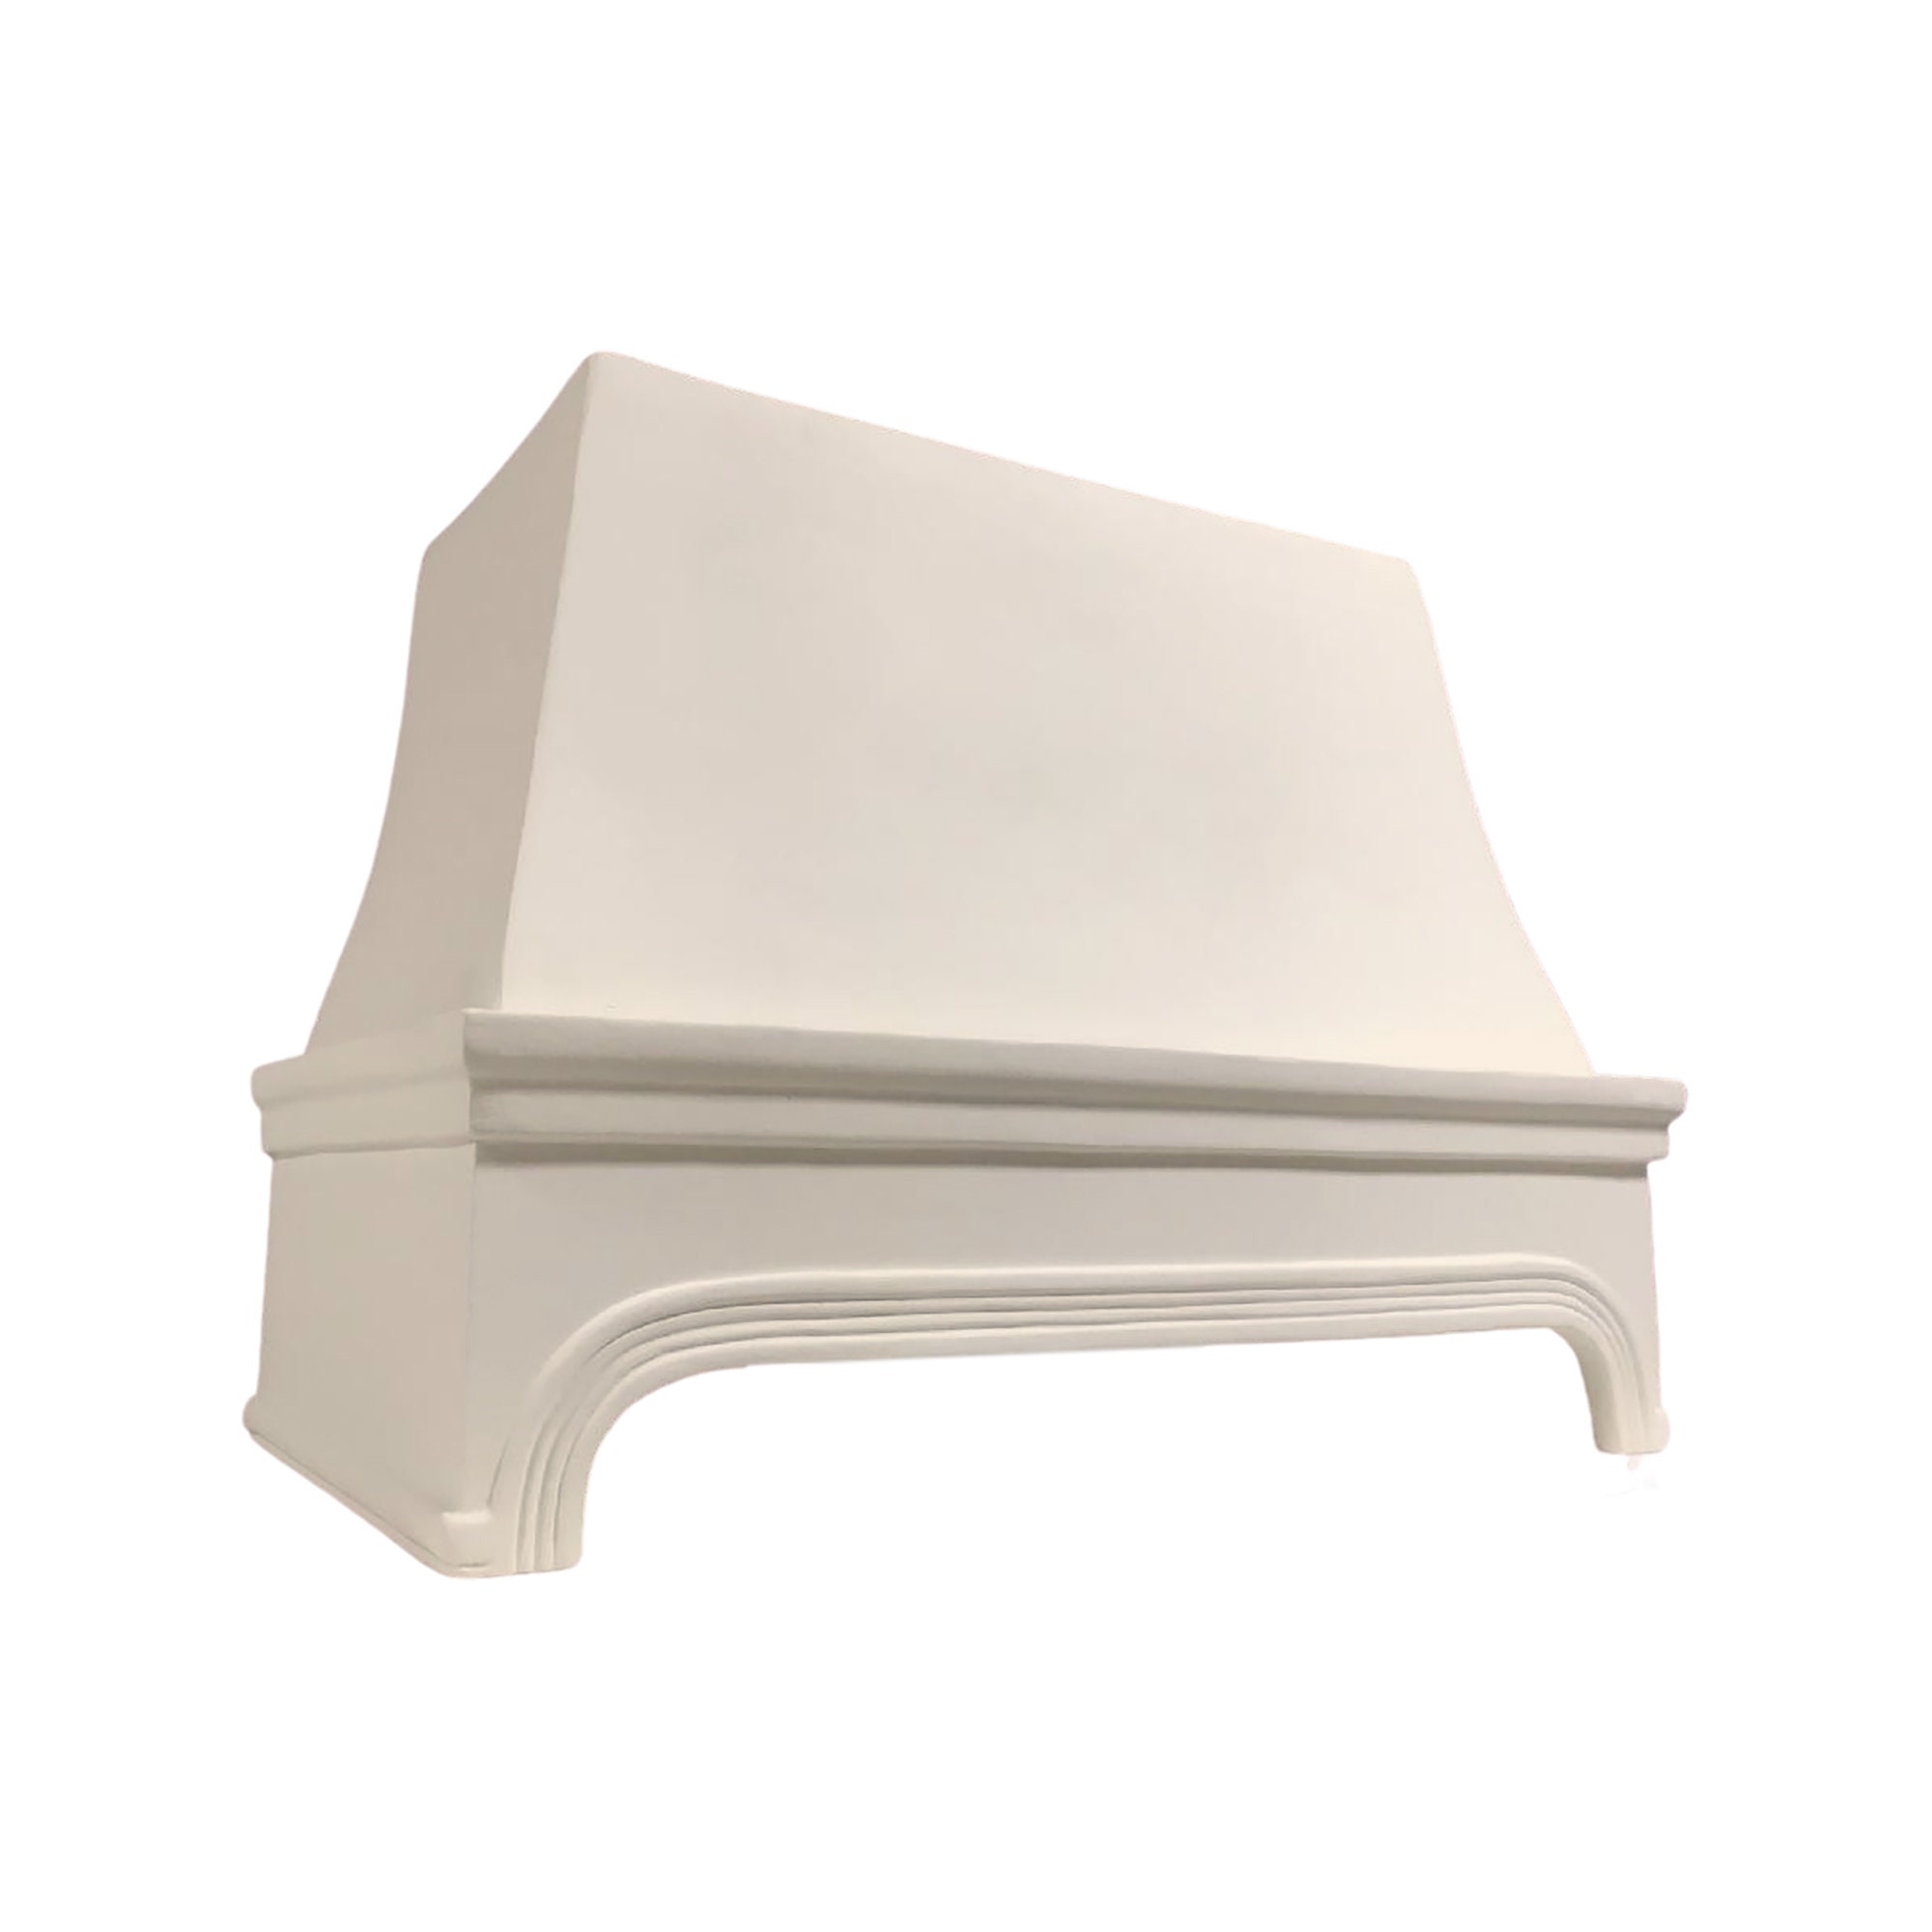 White Wood Range Hood Curved Front With Decorative Molding 30 36